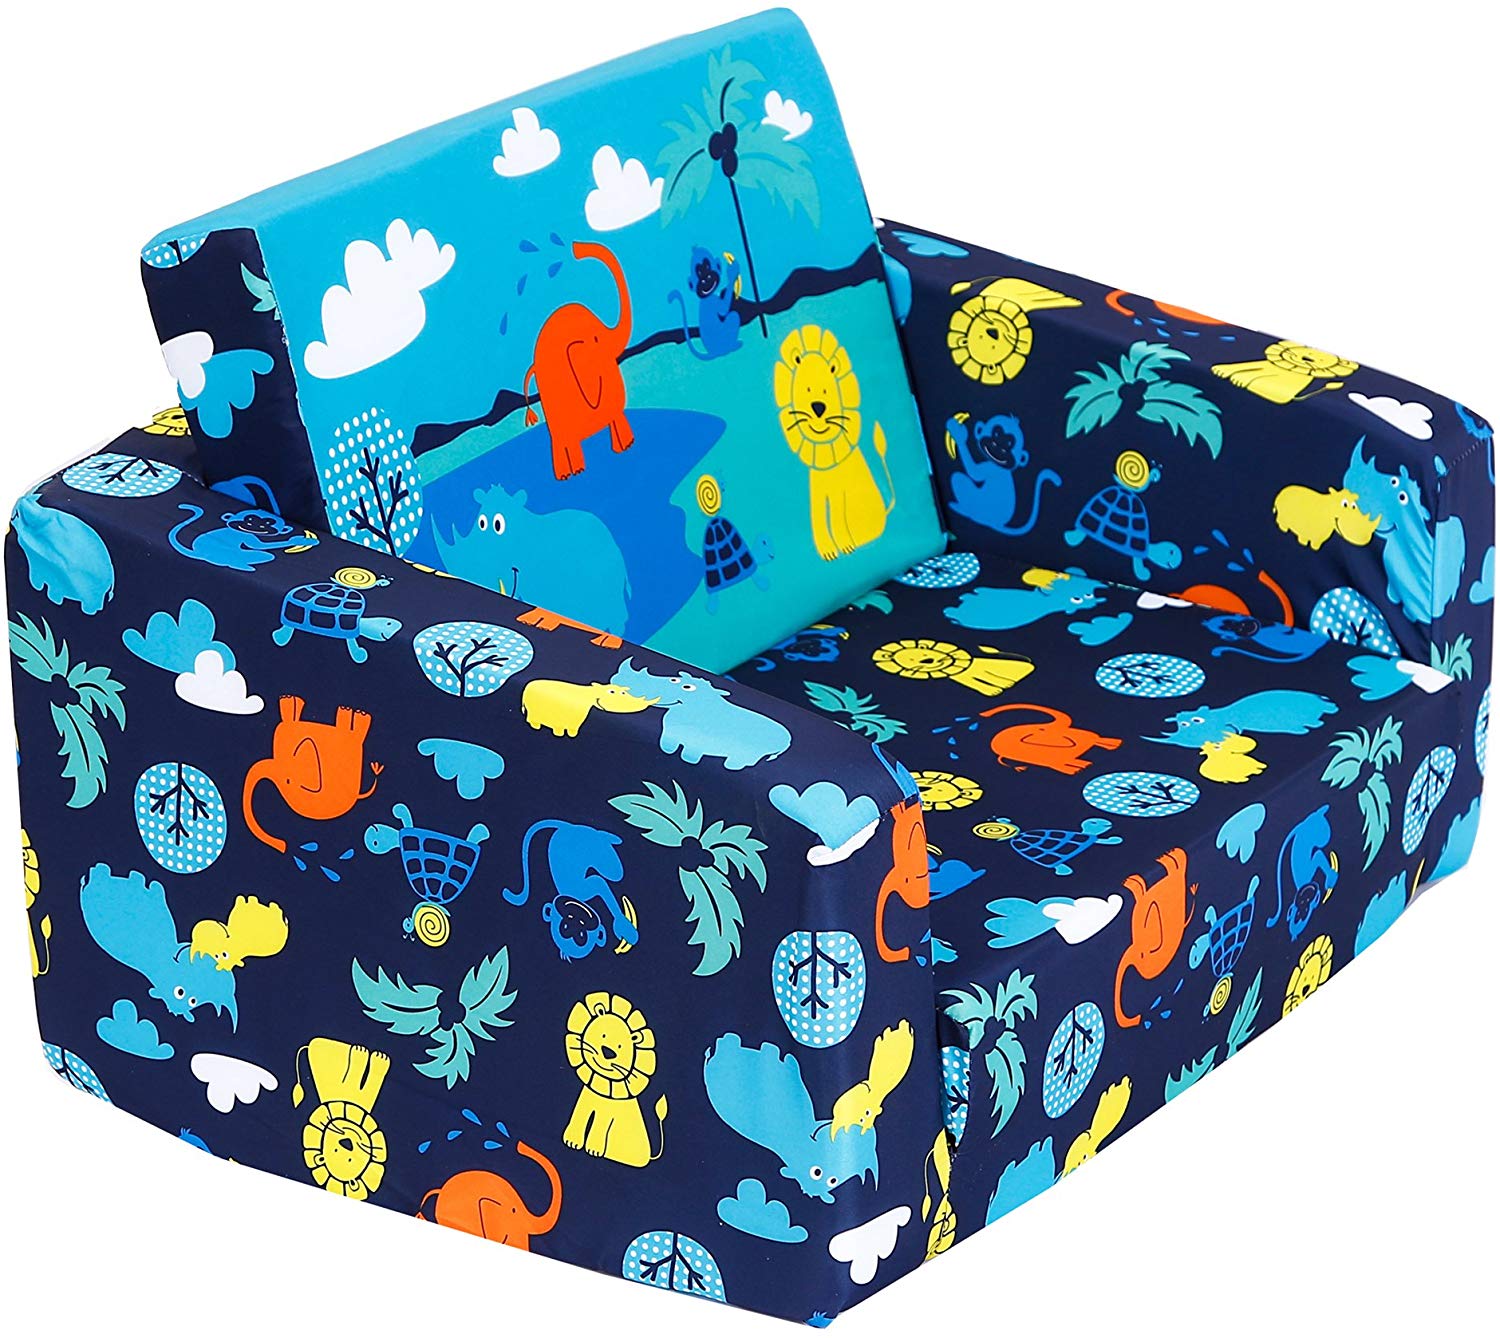 baby bed for couch